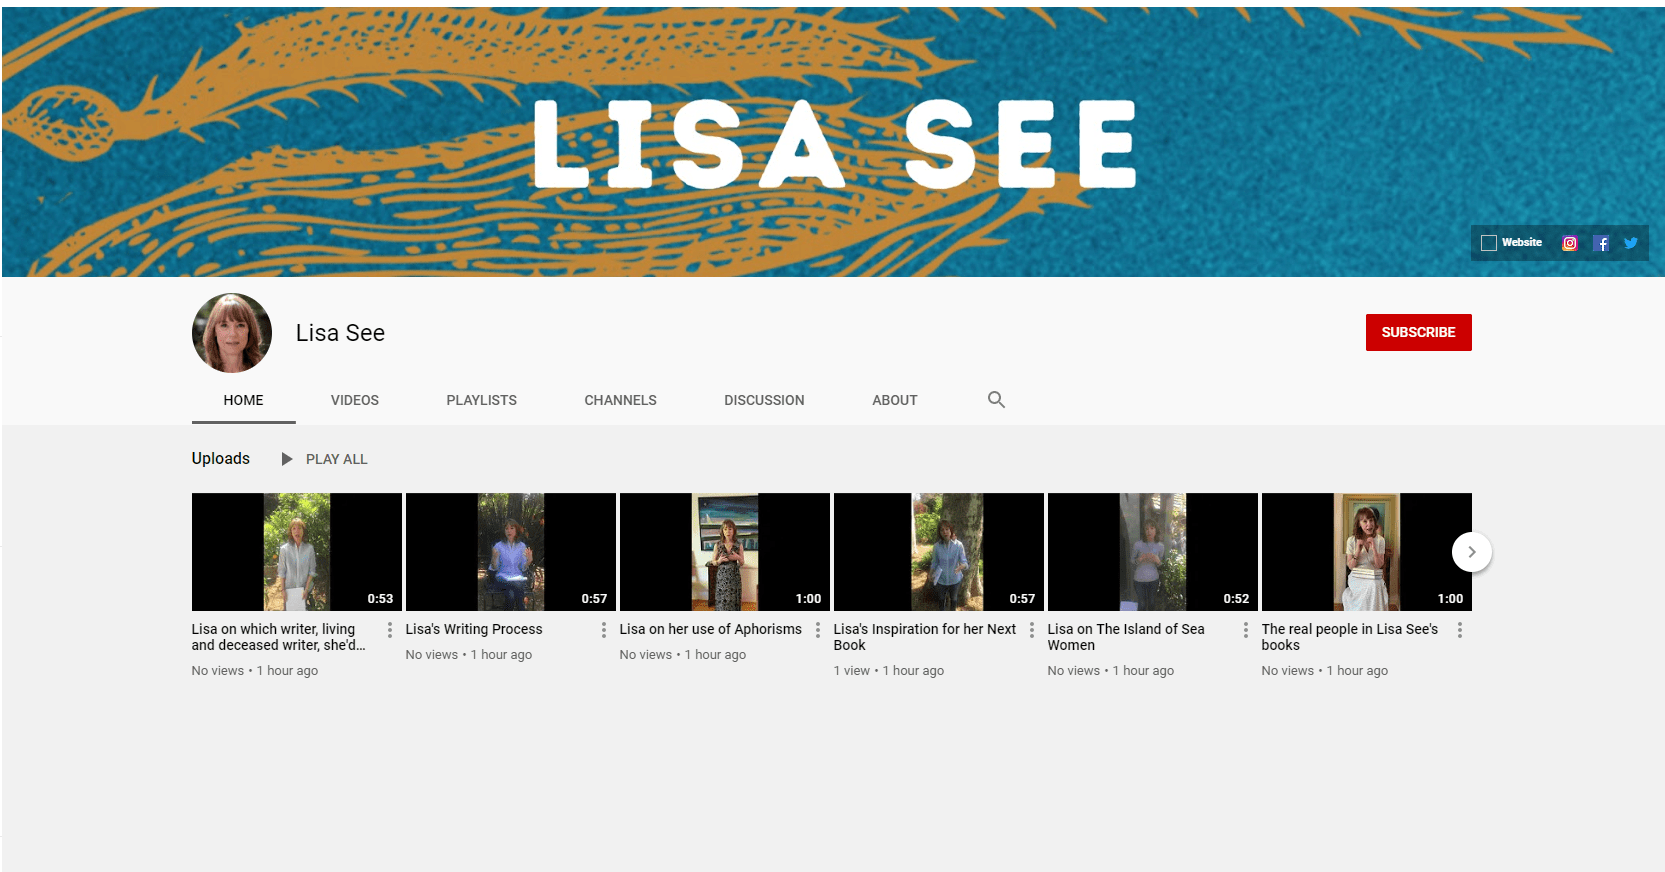 Introducing Lisa See’s Official Youtube Page